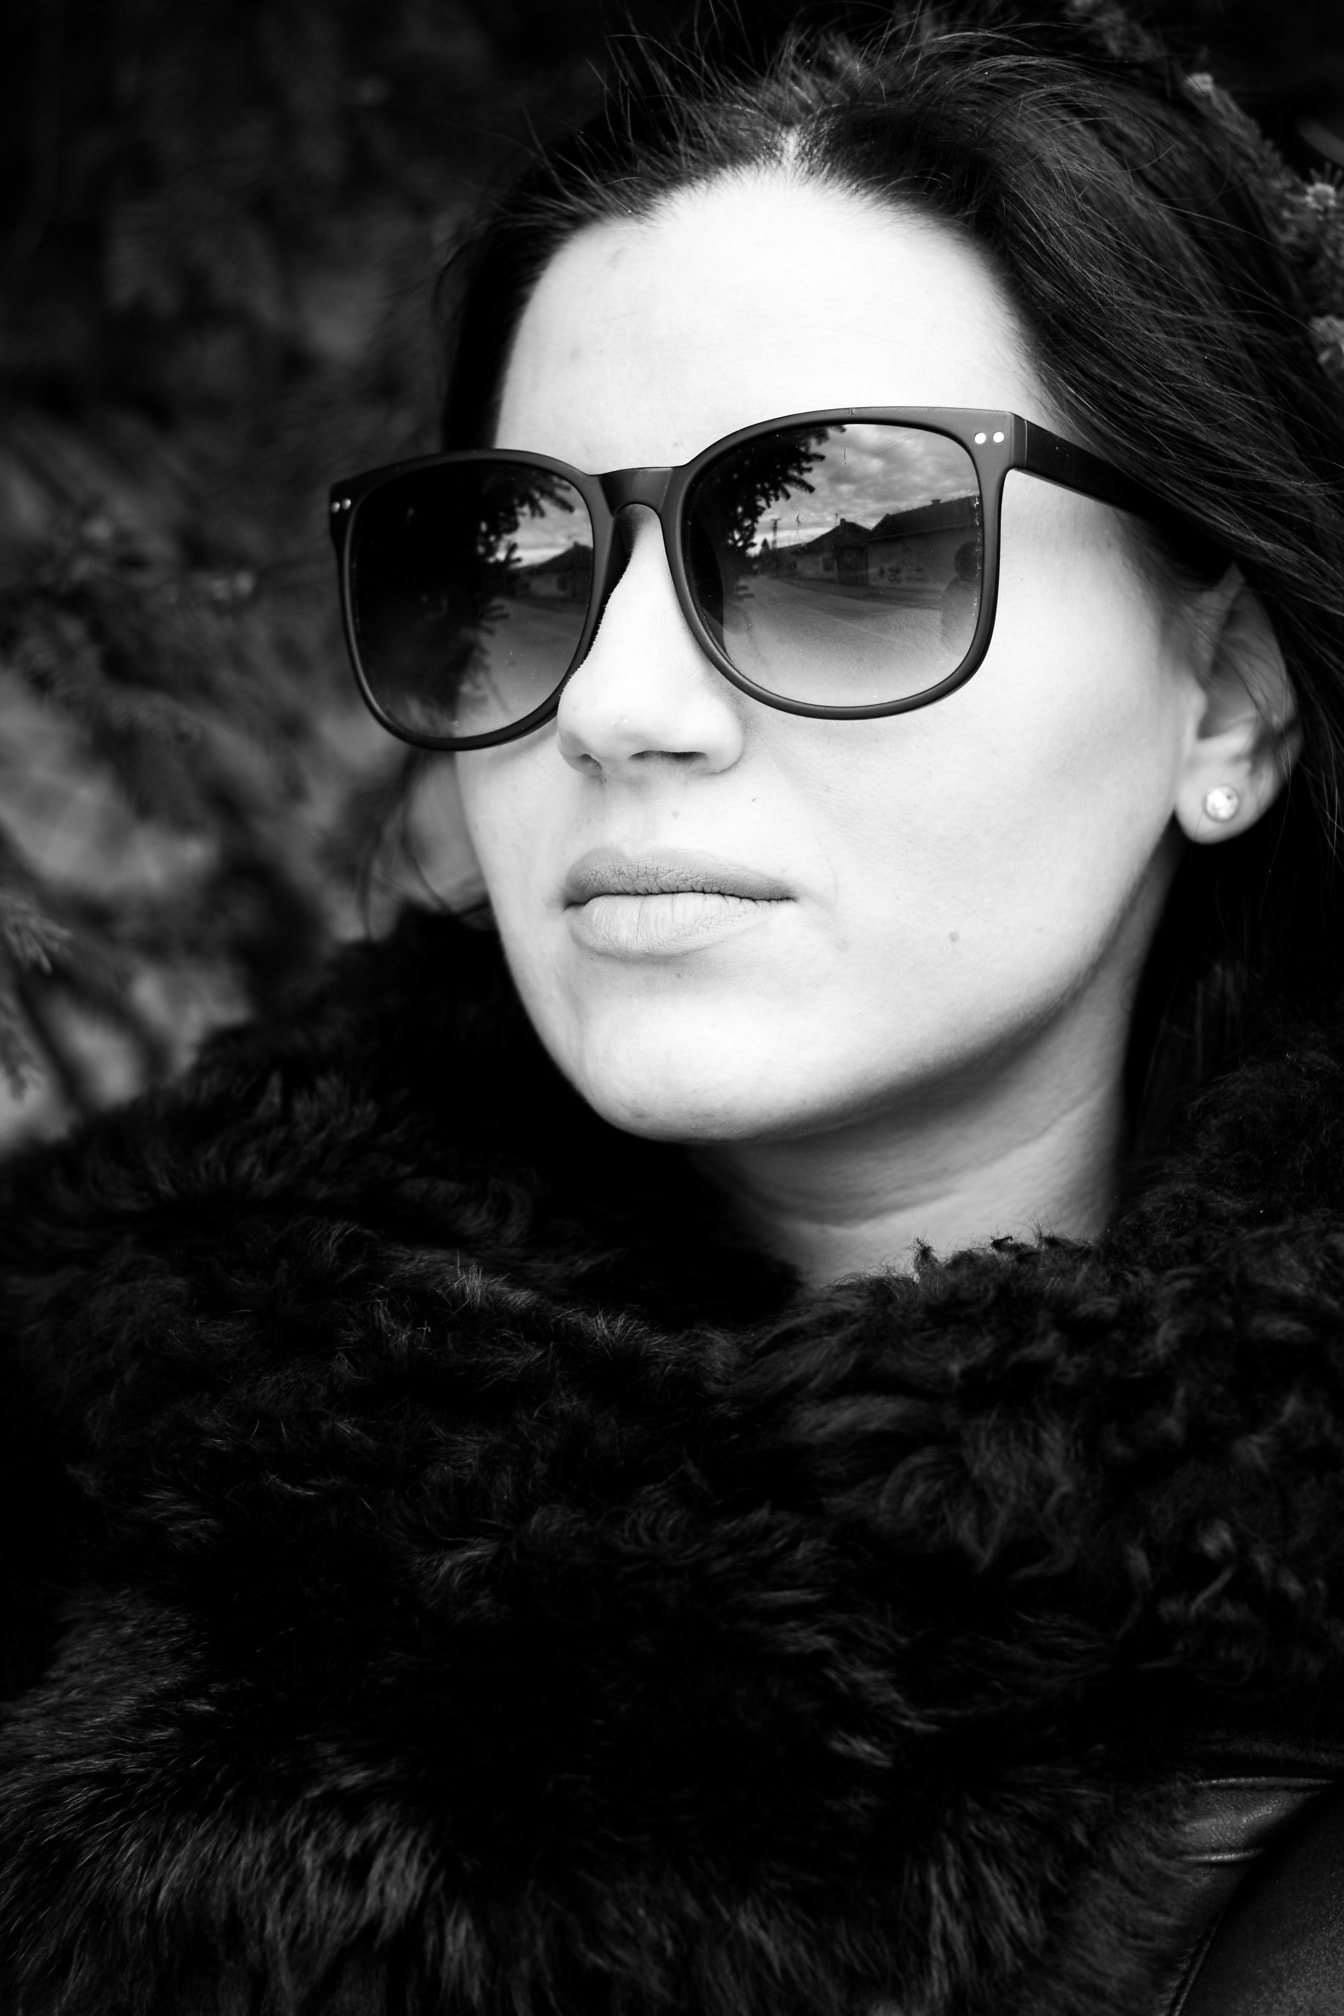 Woman with sunglasses black and white head portrait